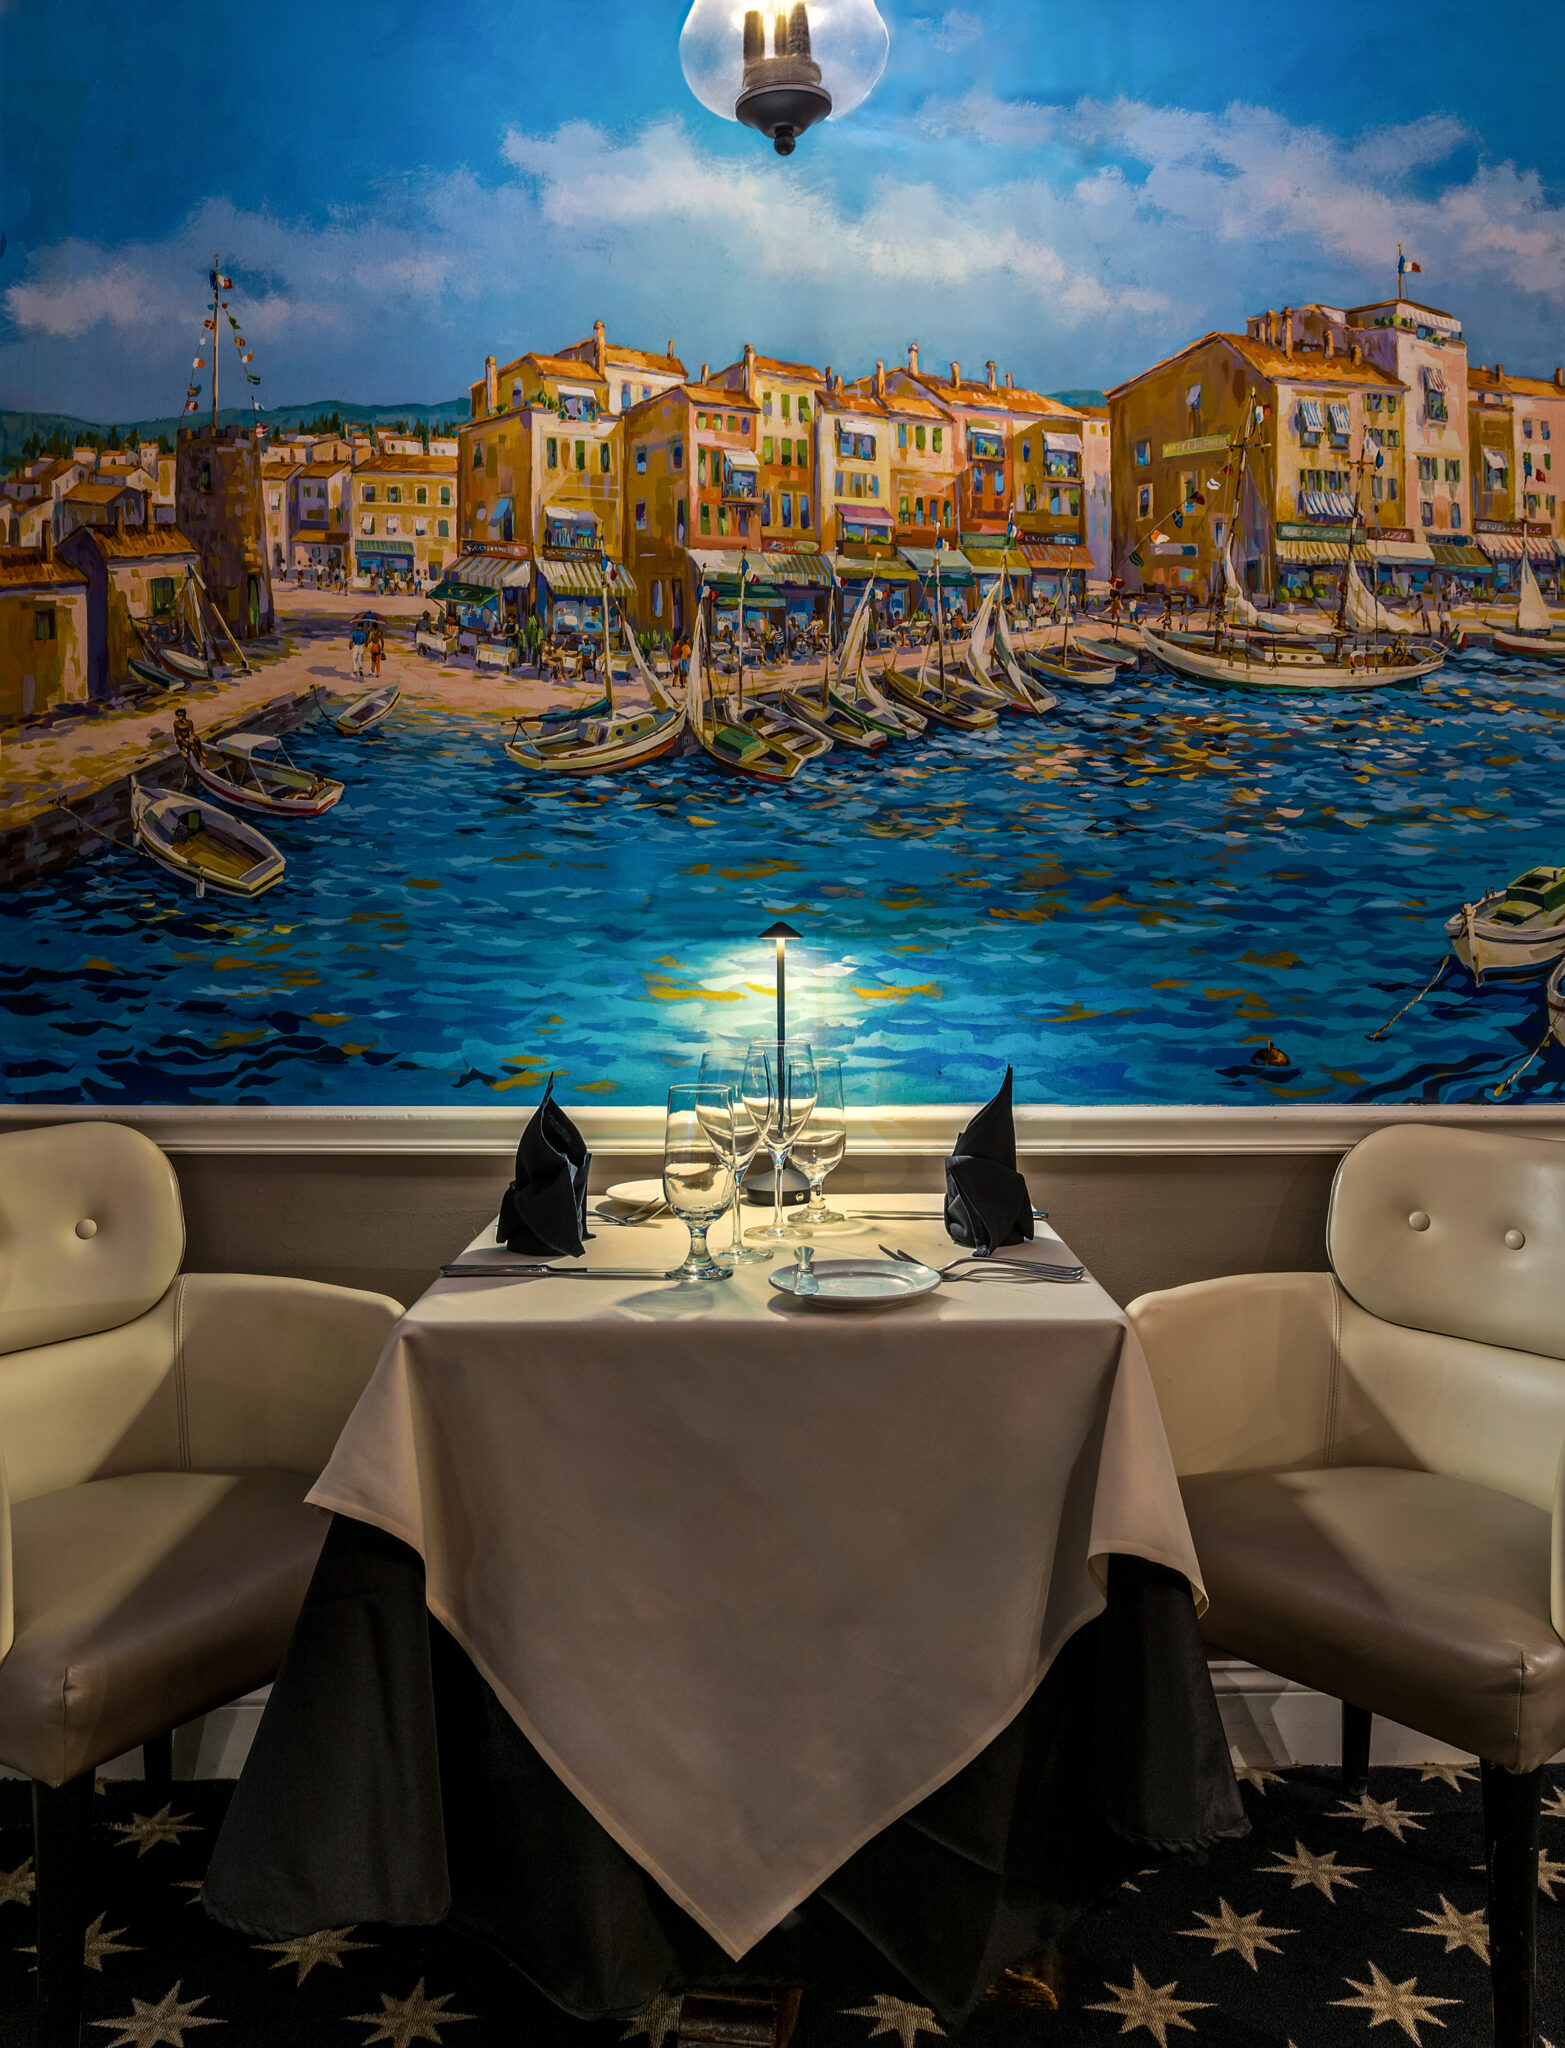 Romantic table for 2 against a beautiful mural in a restaurant in Newport RI.